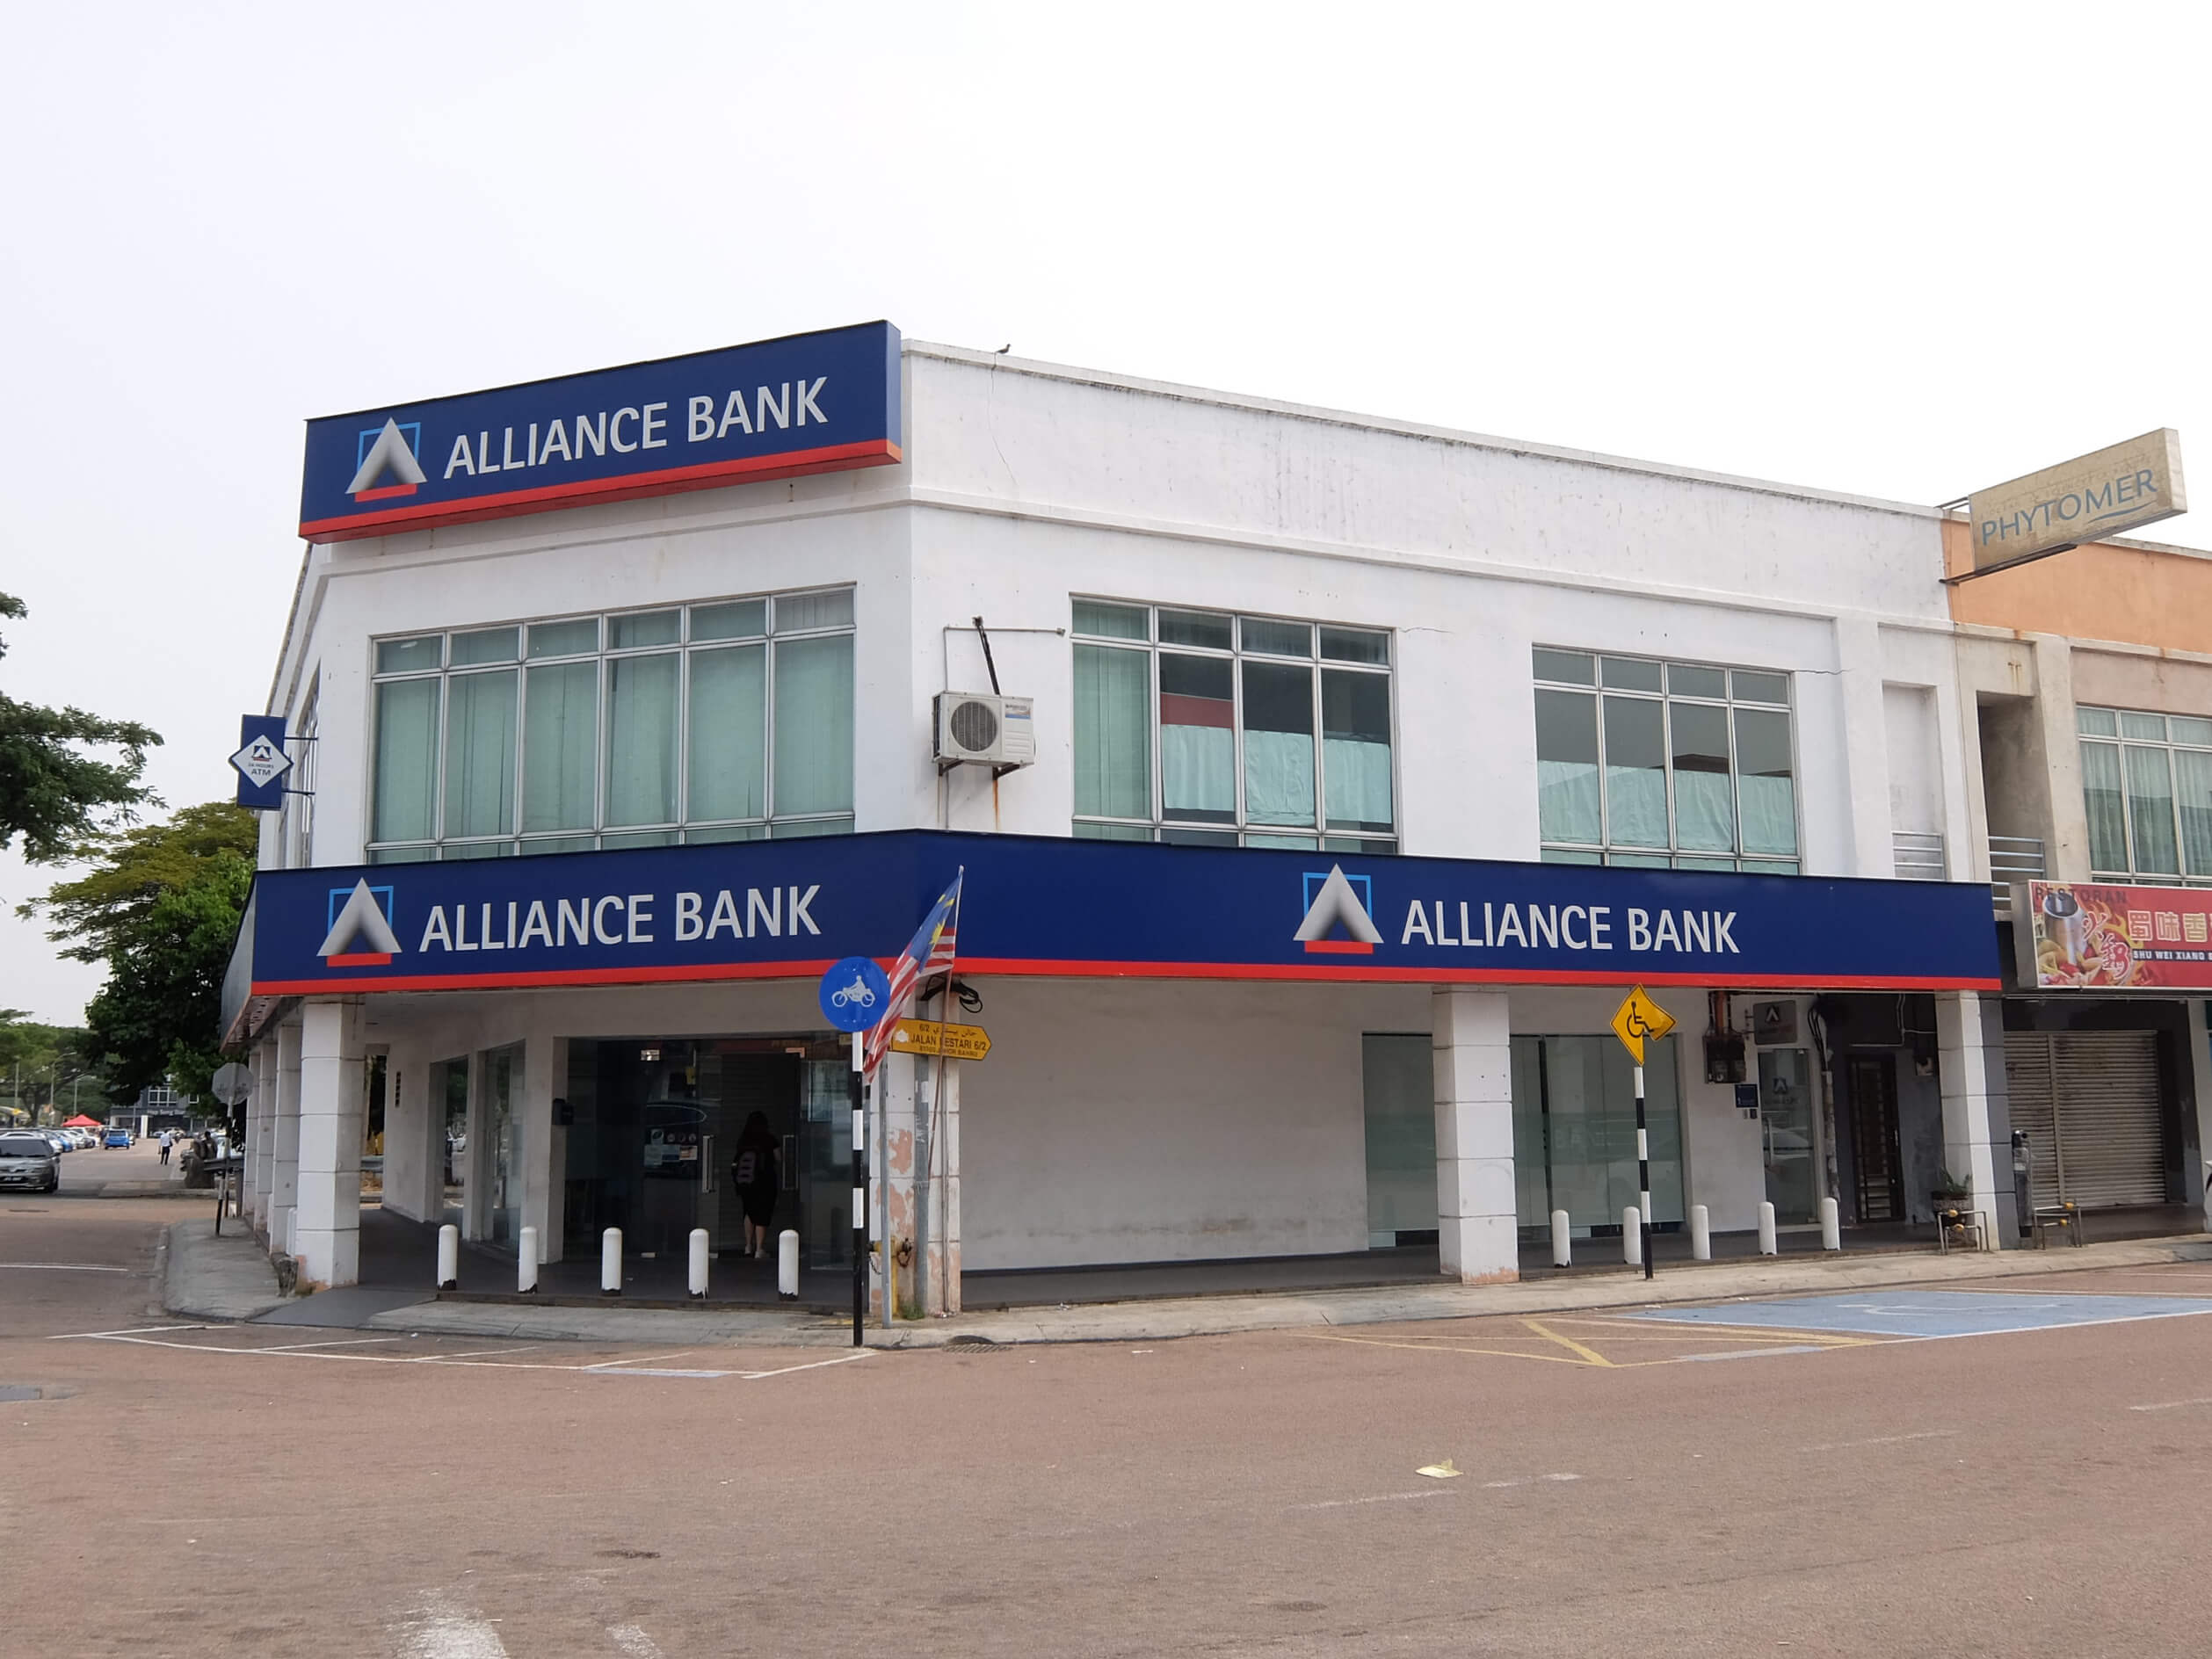 Alliance Bank Malaysia uses Red Hat open source software to deliver CX